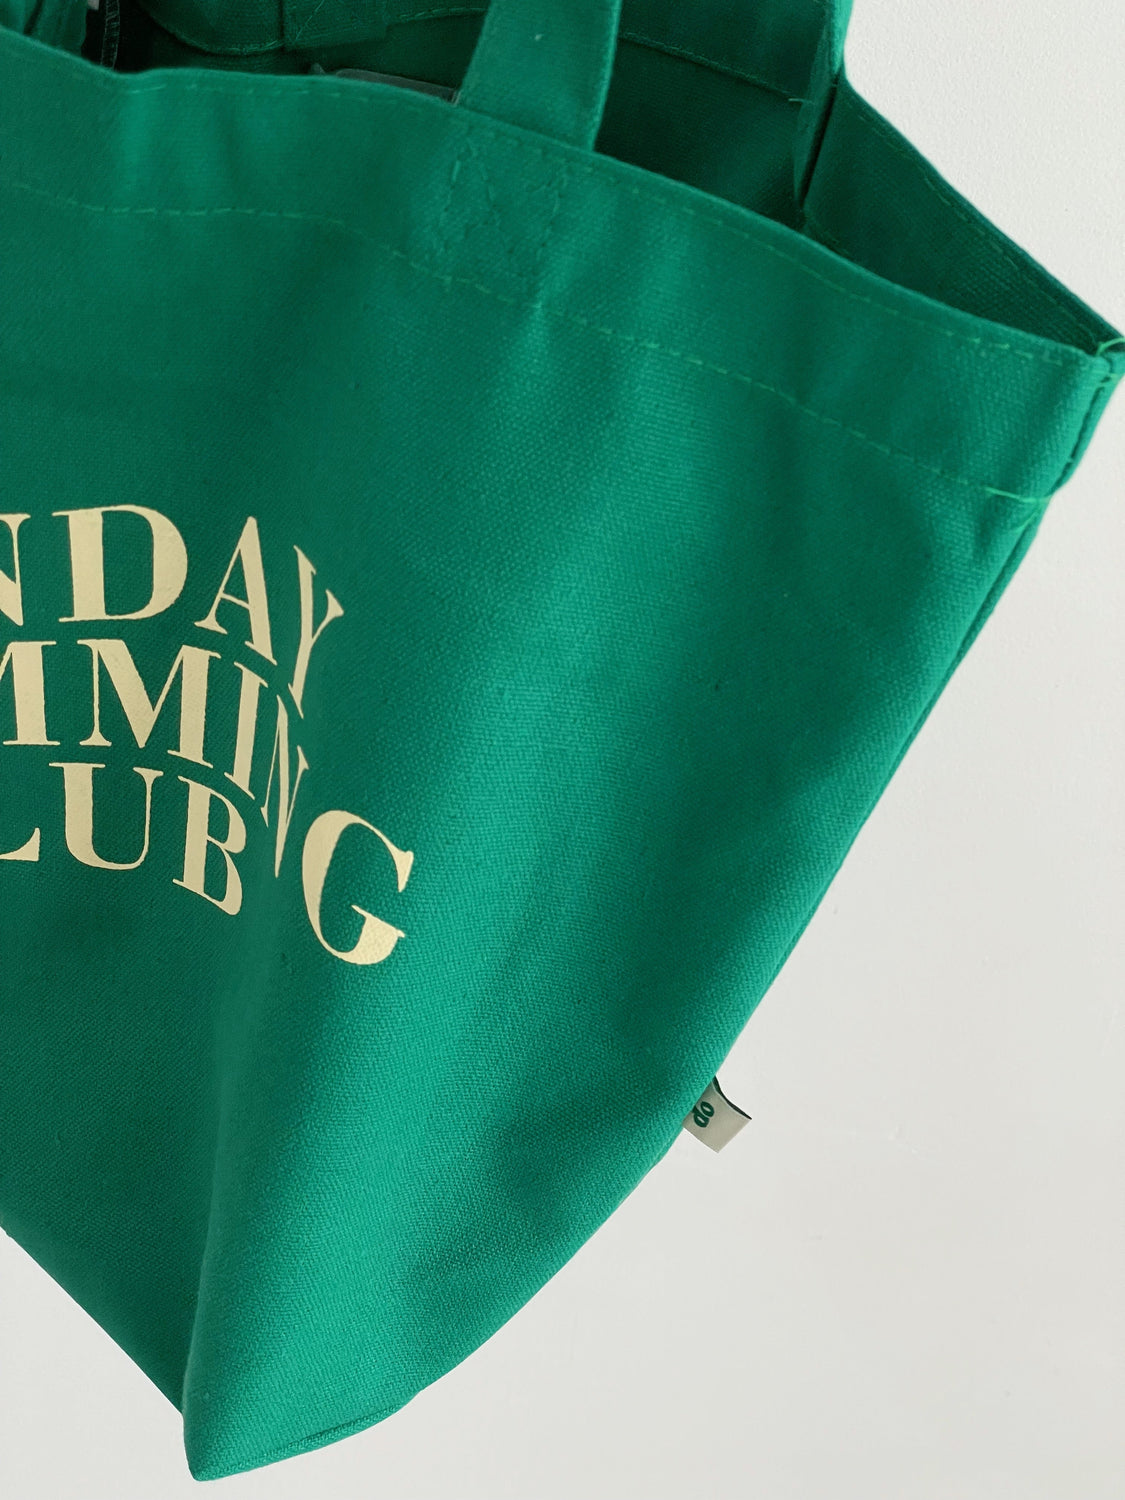 Sunday Tote Green